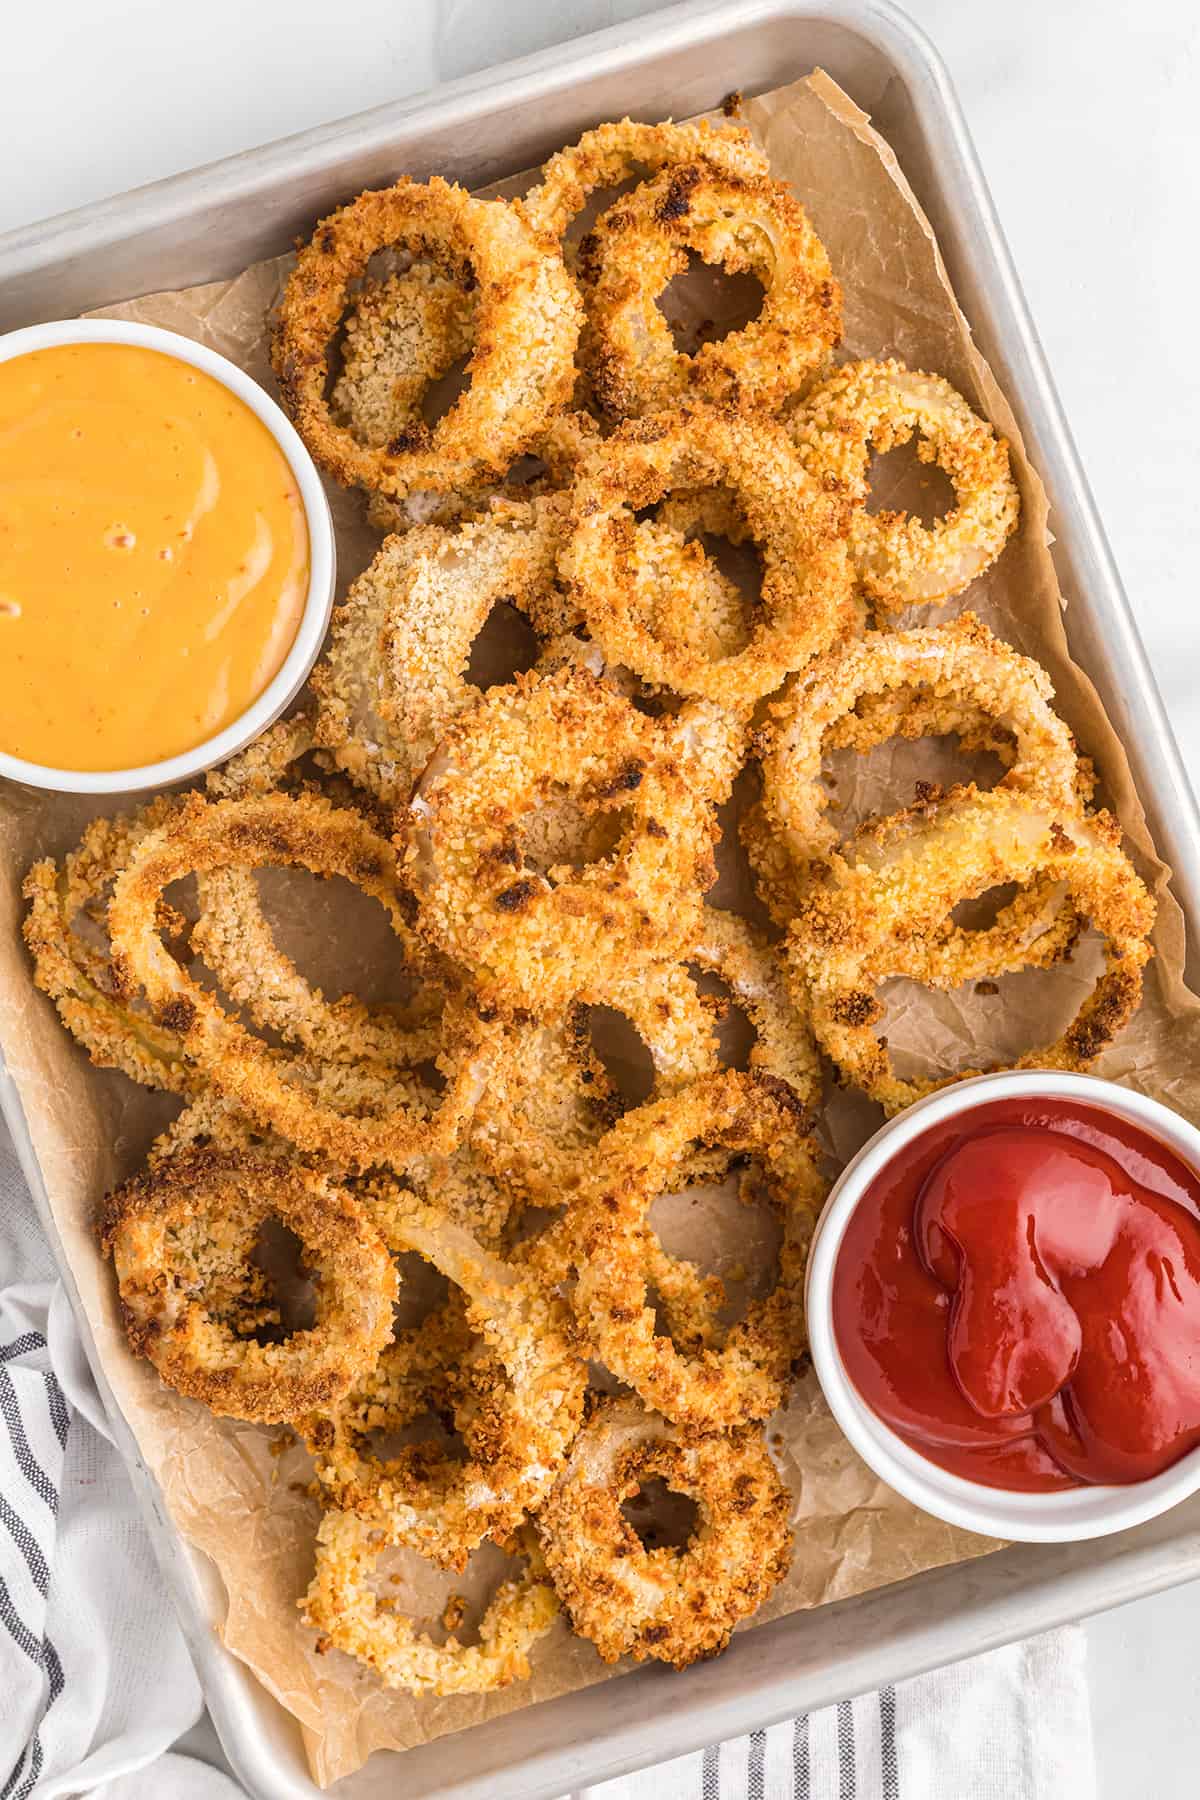 Finished panko onion rings on a baking sheet with a container of ketchup to the side.